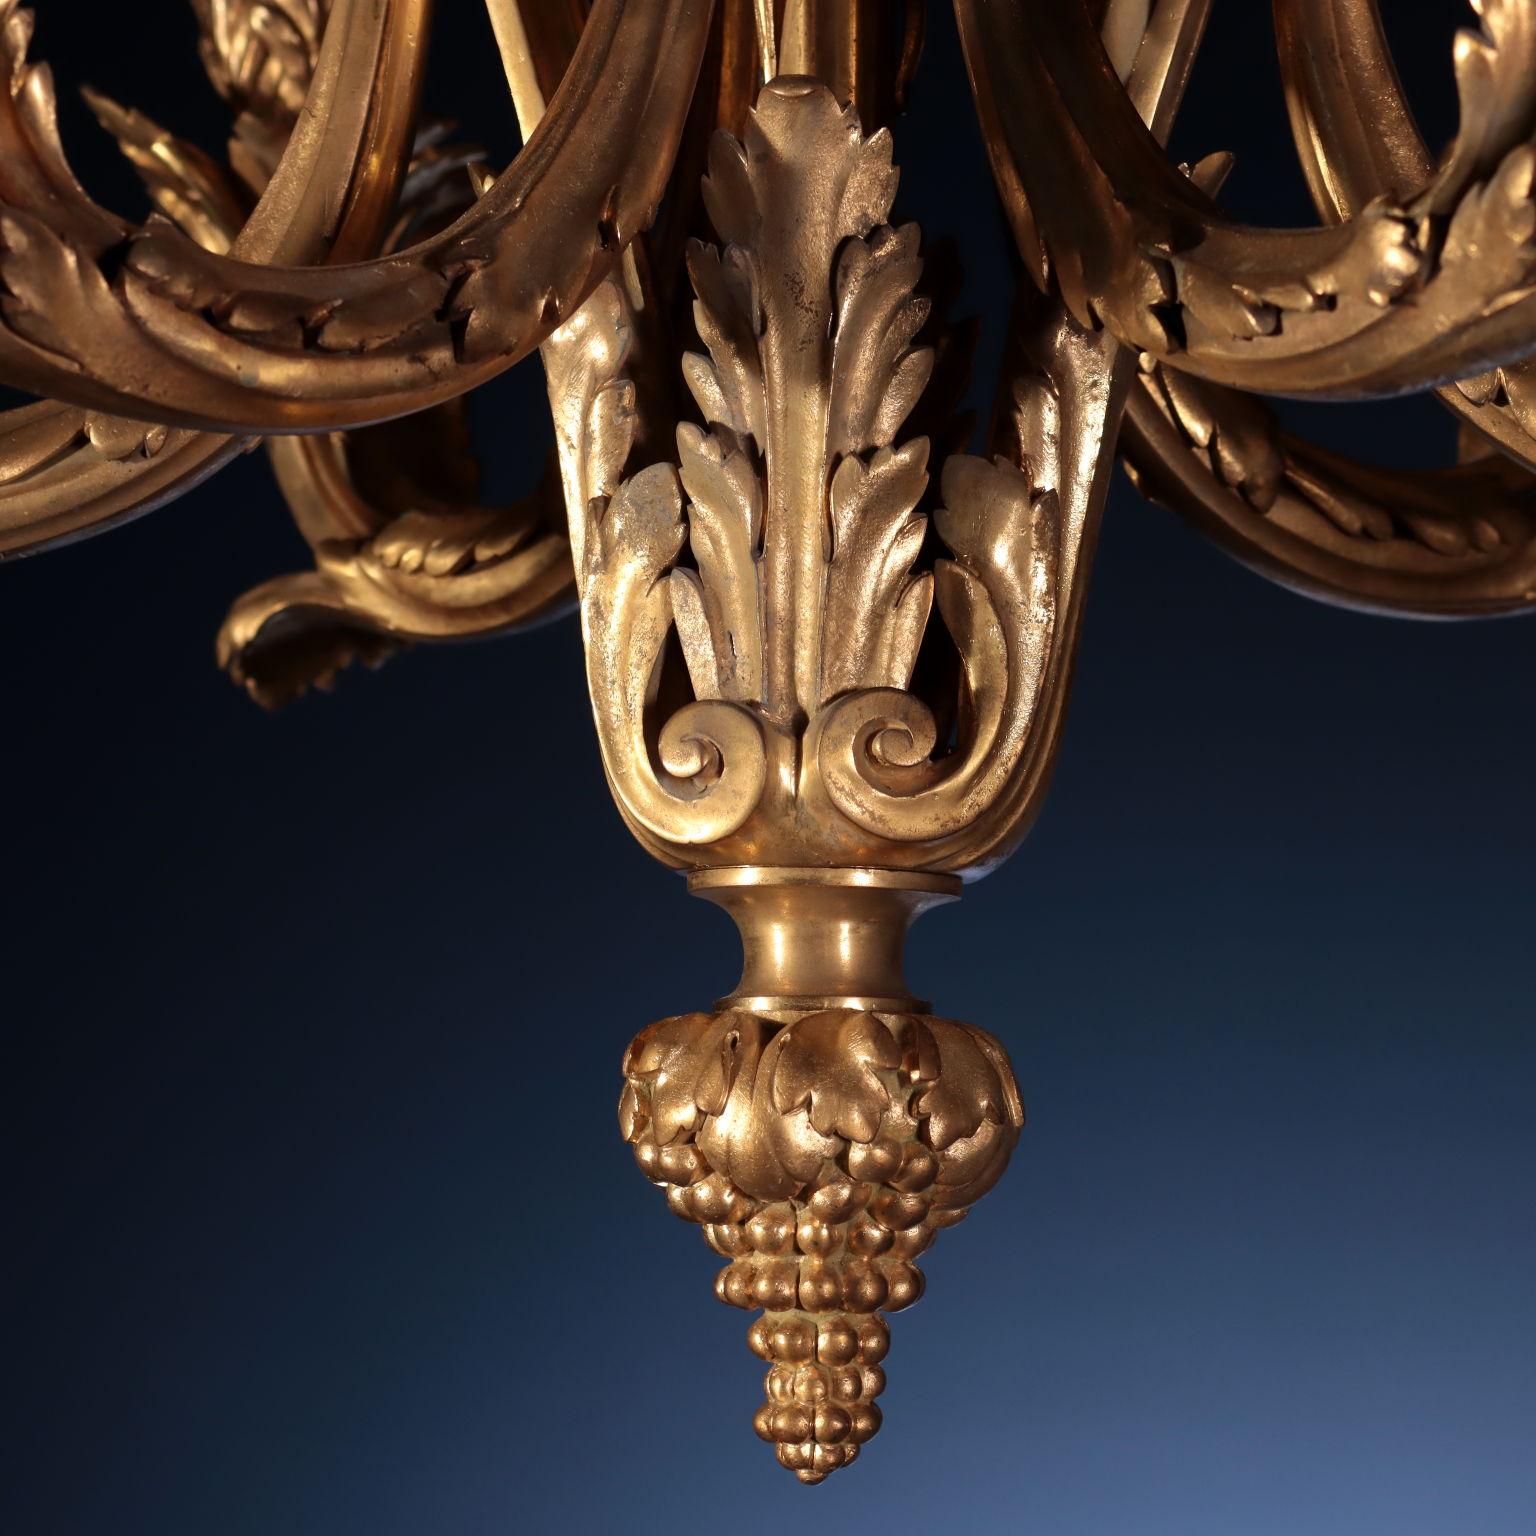 Other Chandelier “O. Lelièvre Sclp”, “Susse Fres Edts” Gilded Bronze For Sale